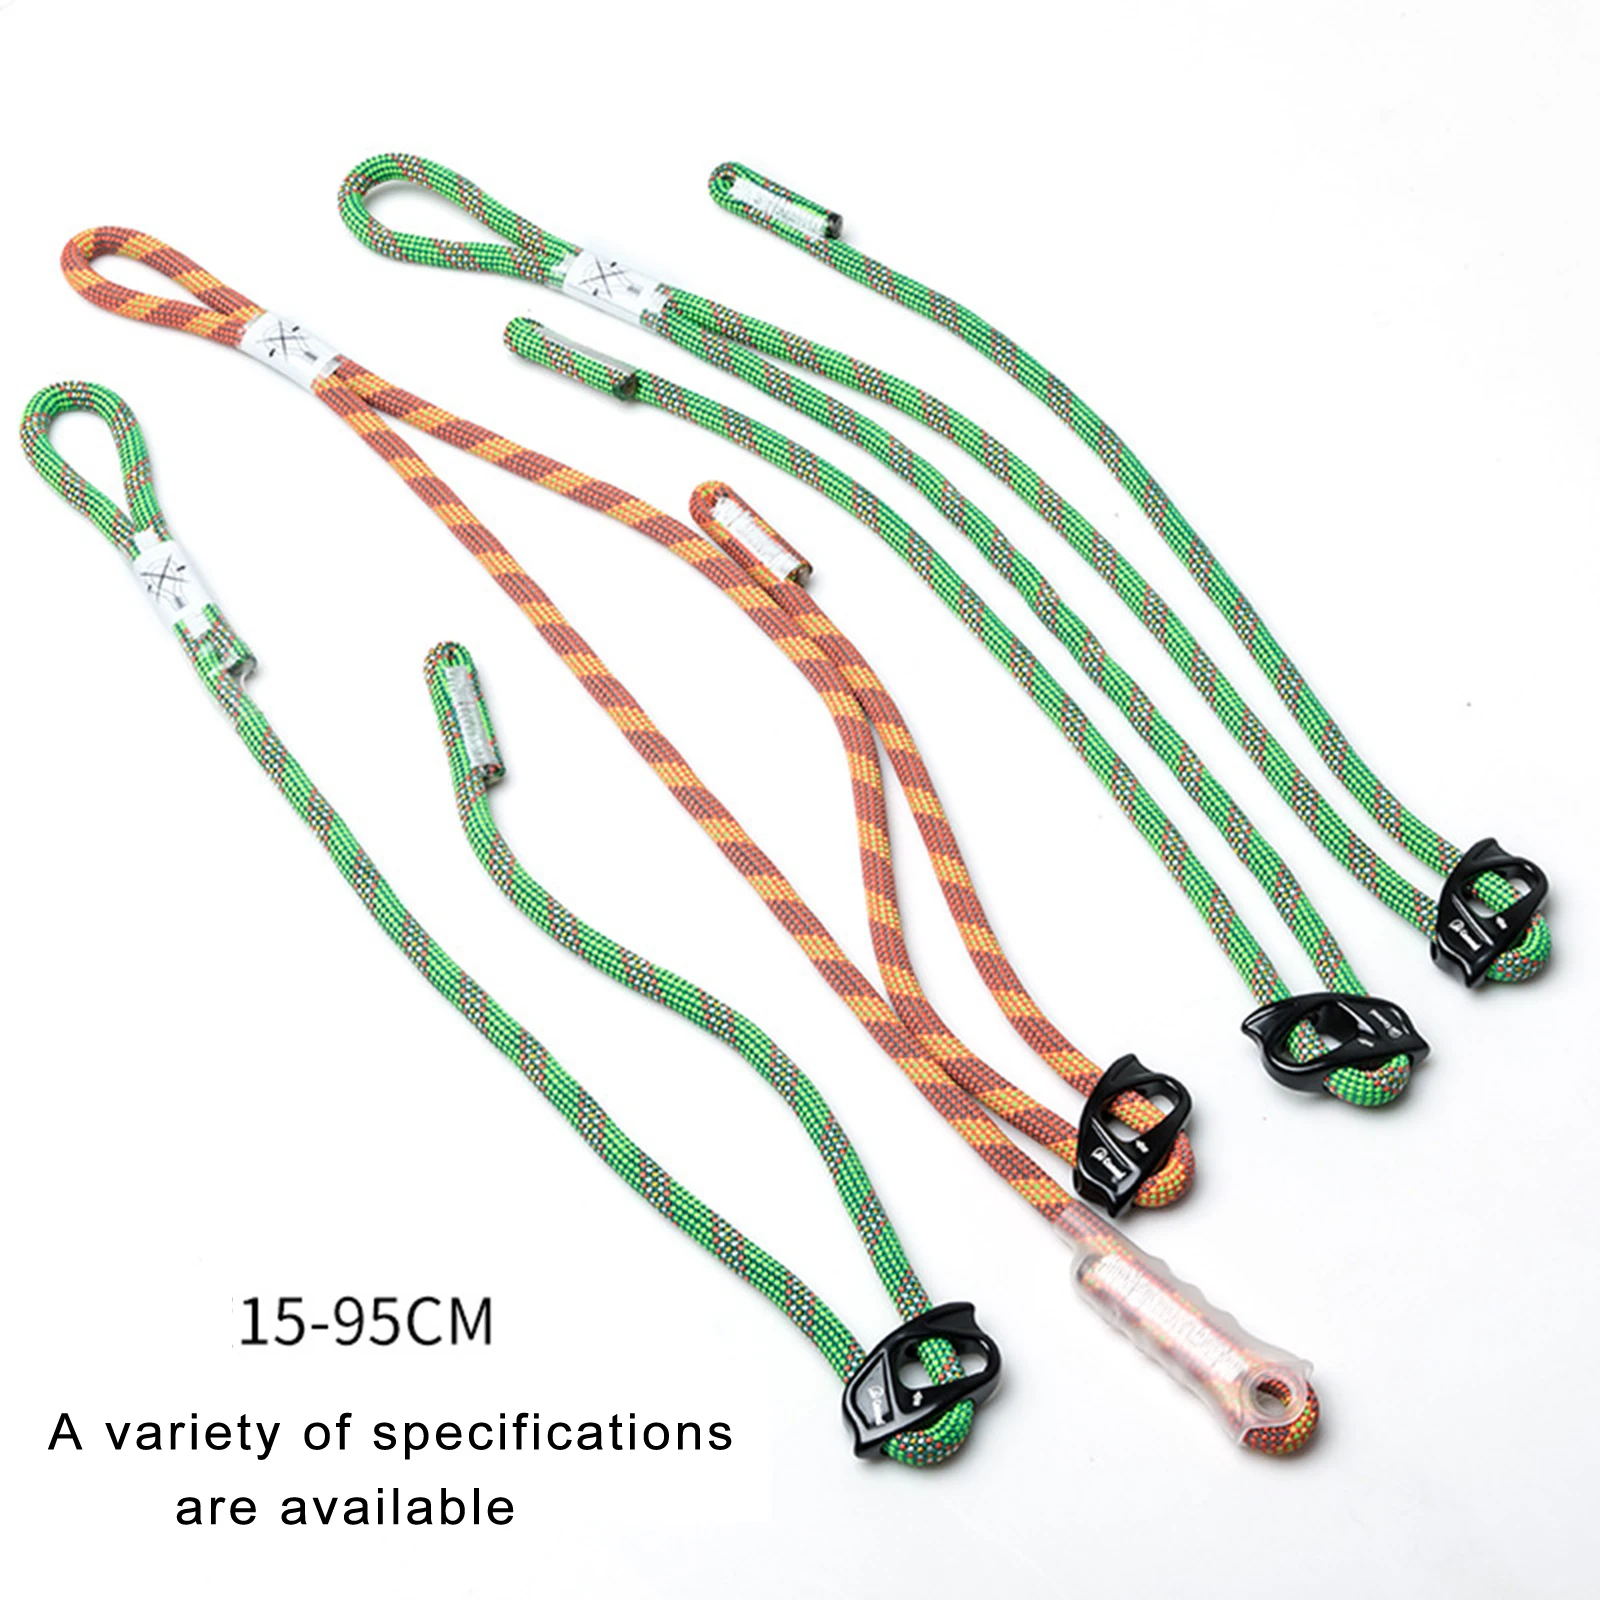 Positioning Lanyard Harness Rope Buffered Strap for Rock Climbing Equipment